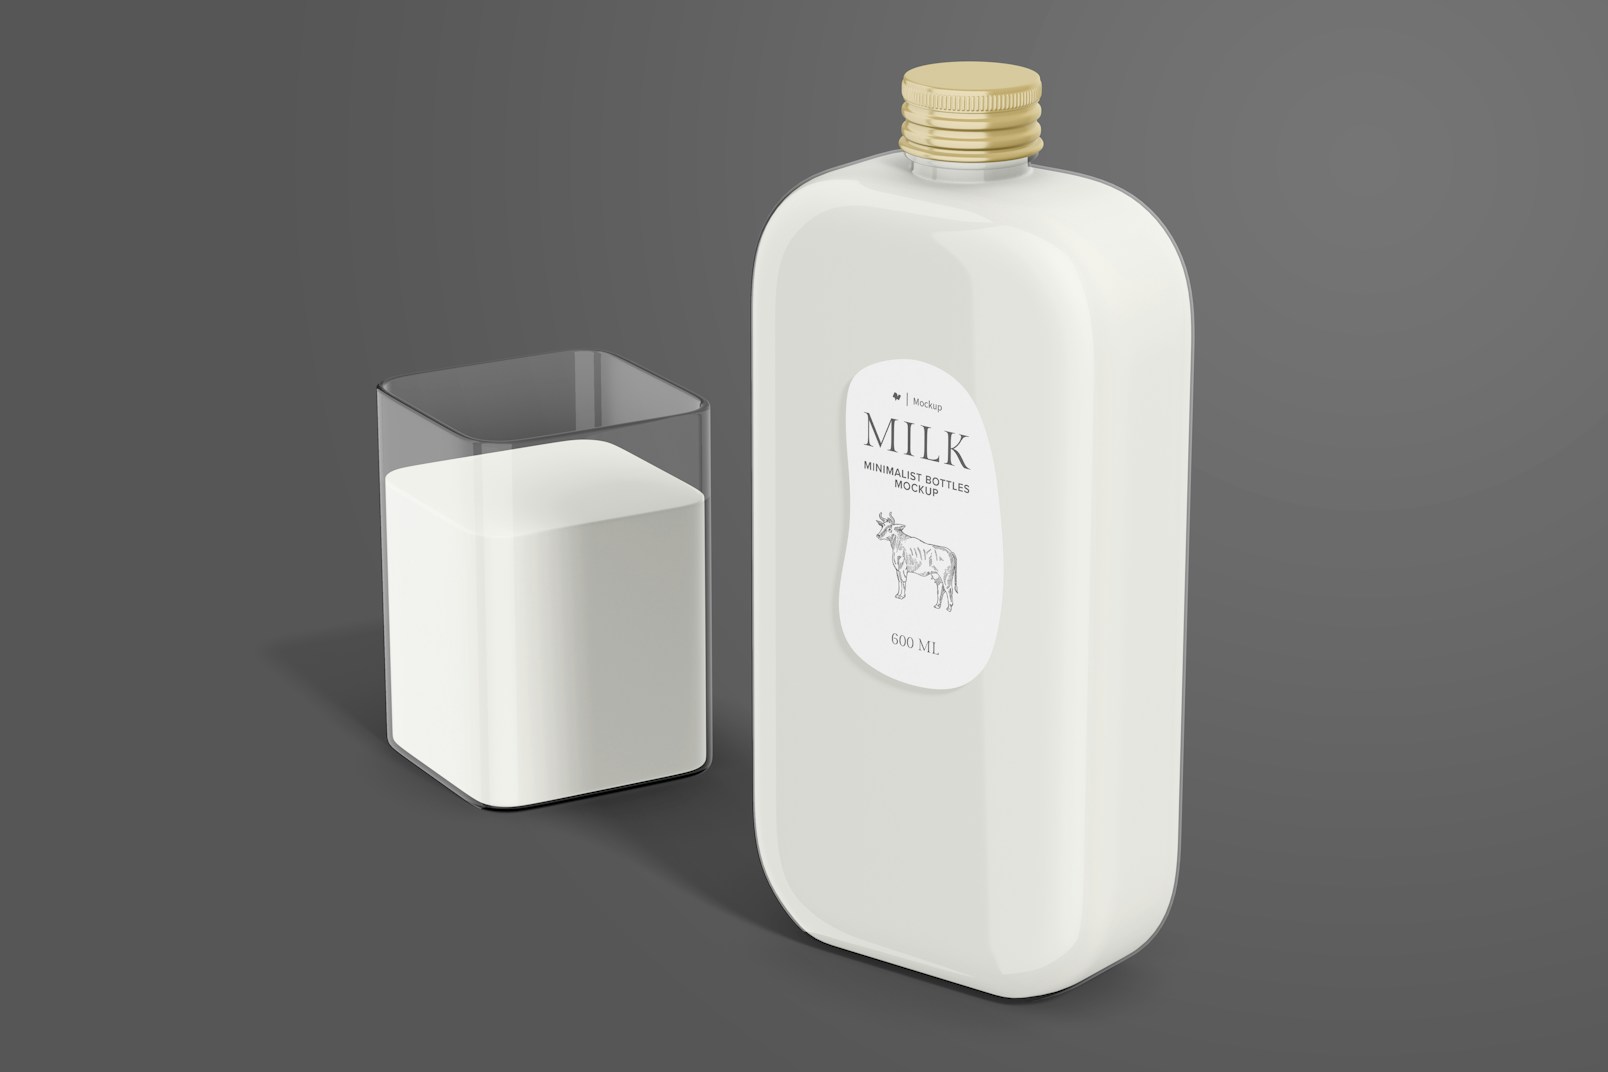 Milk Bottle with Round Corners Mockup, Perspective